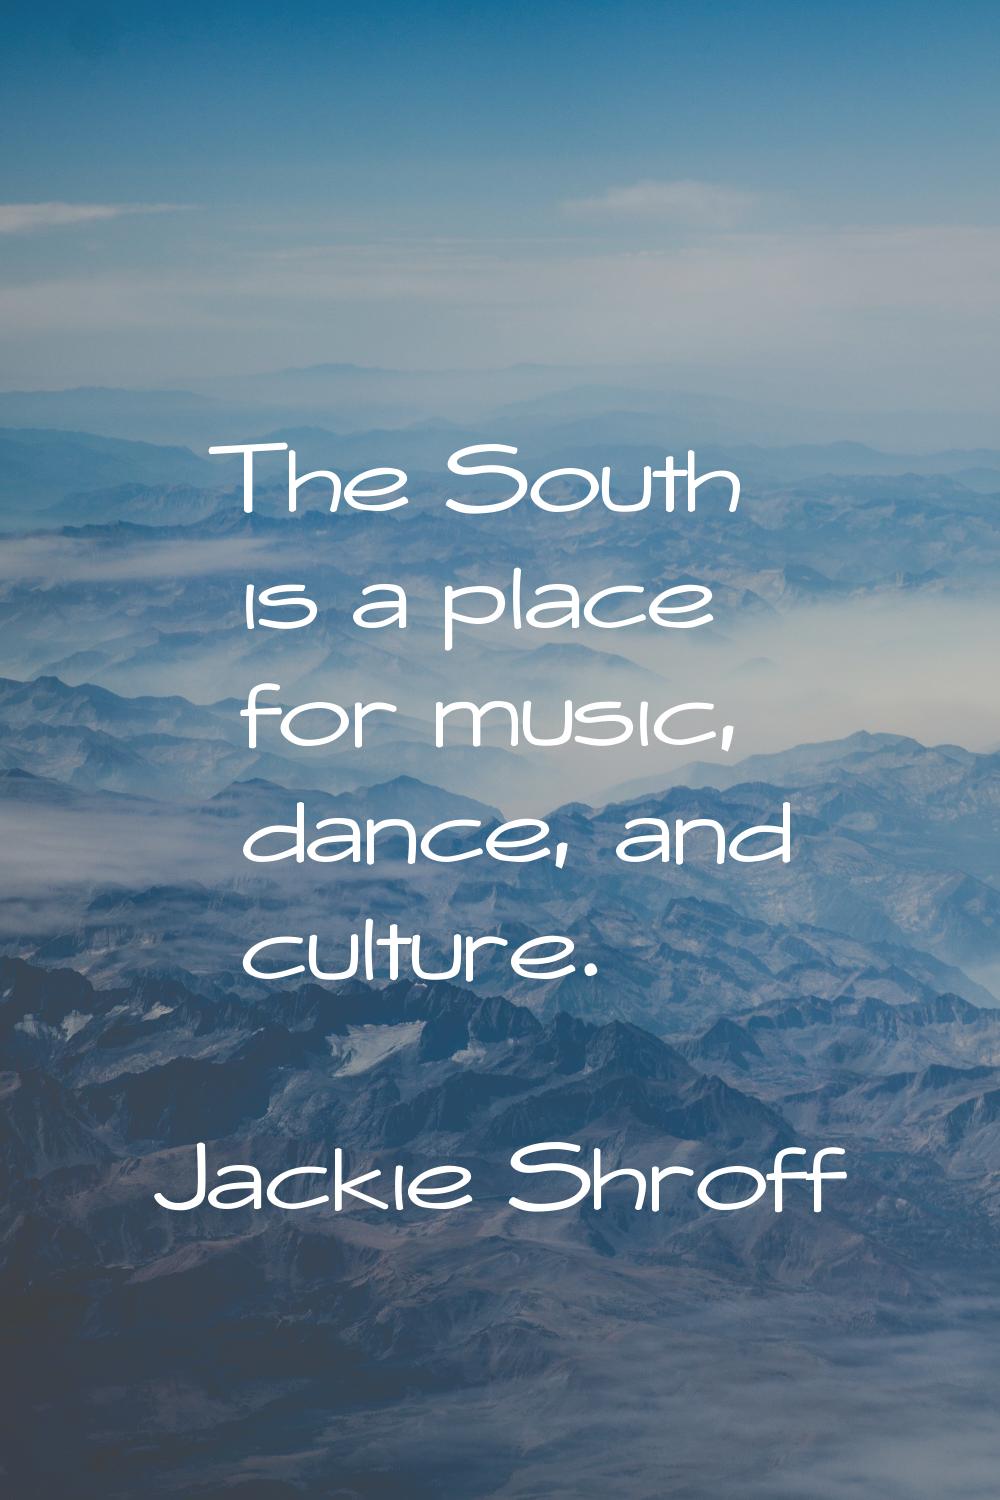 The South is a place for music, dance, and culture.